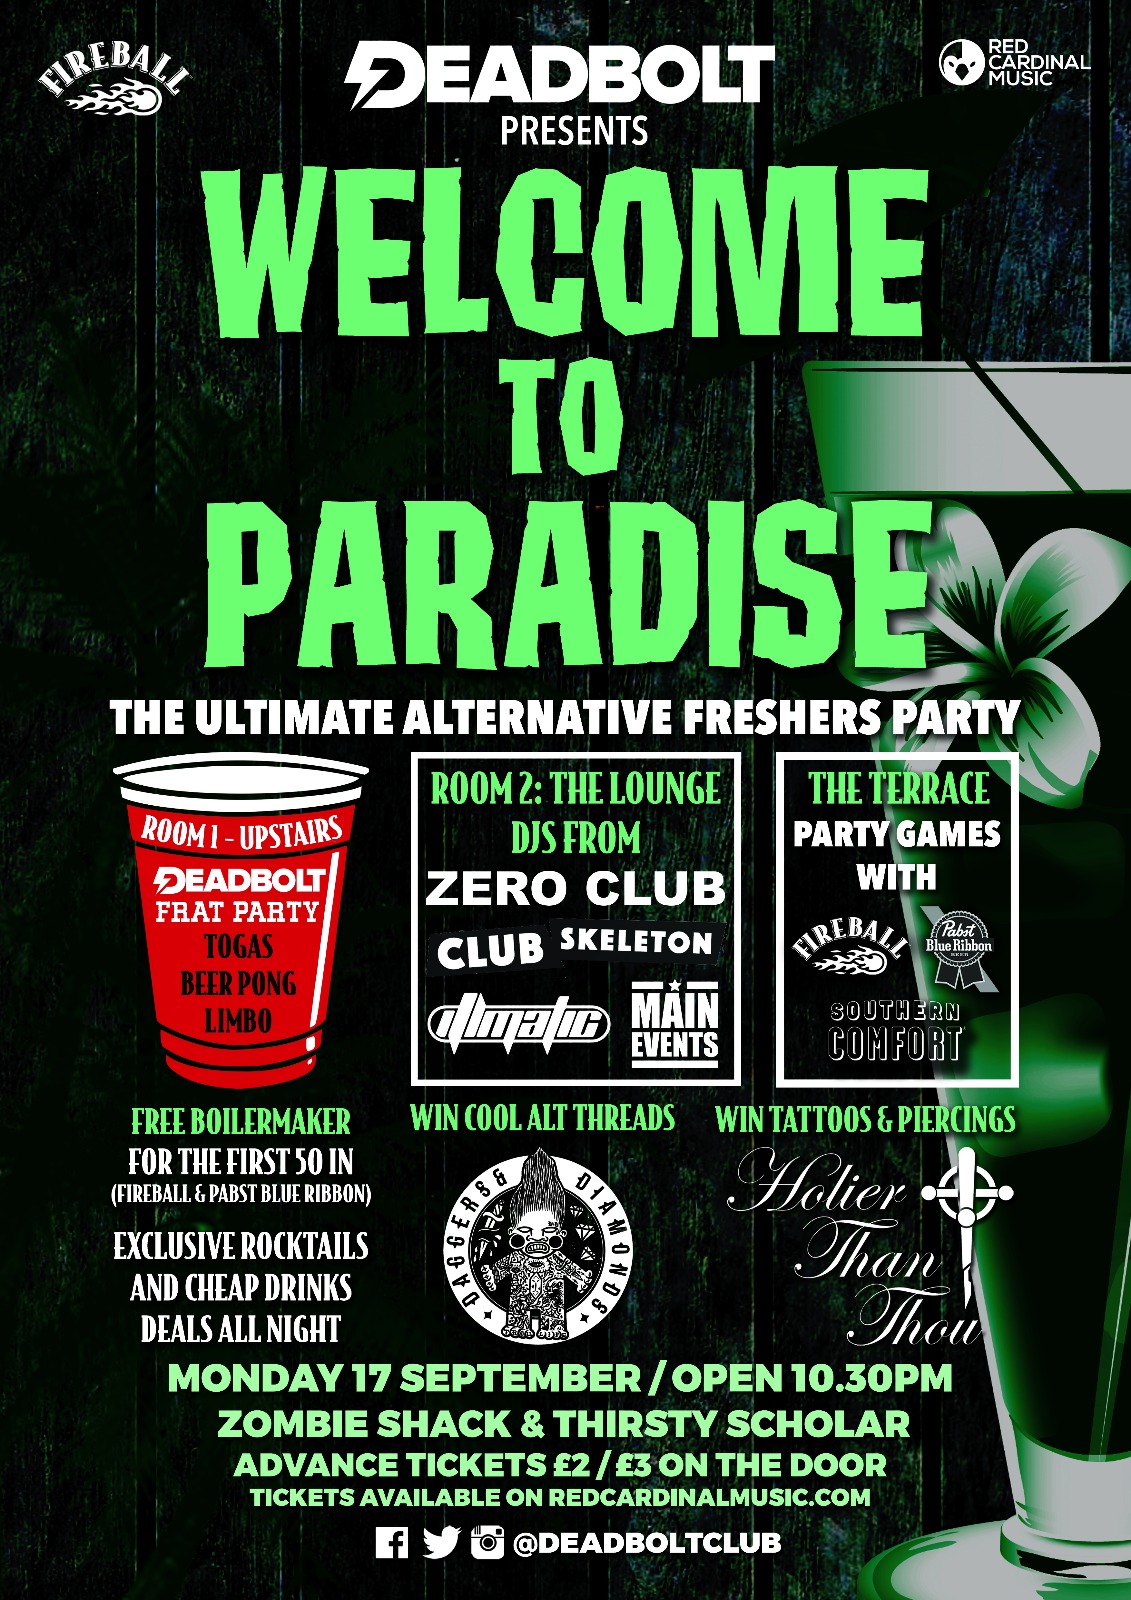 Welcome To Paradise - Alternative Freshers Manchester Poster - Red Cardinal Music - Metal, Rock, Pop Punk - Holier Than Thou Tattoos, Fireball, Pabst Blue Ribbon, Southern Comfort, Daggers and Diamonds